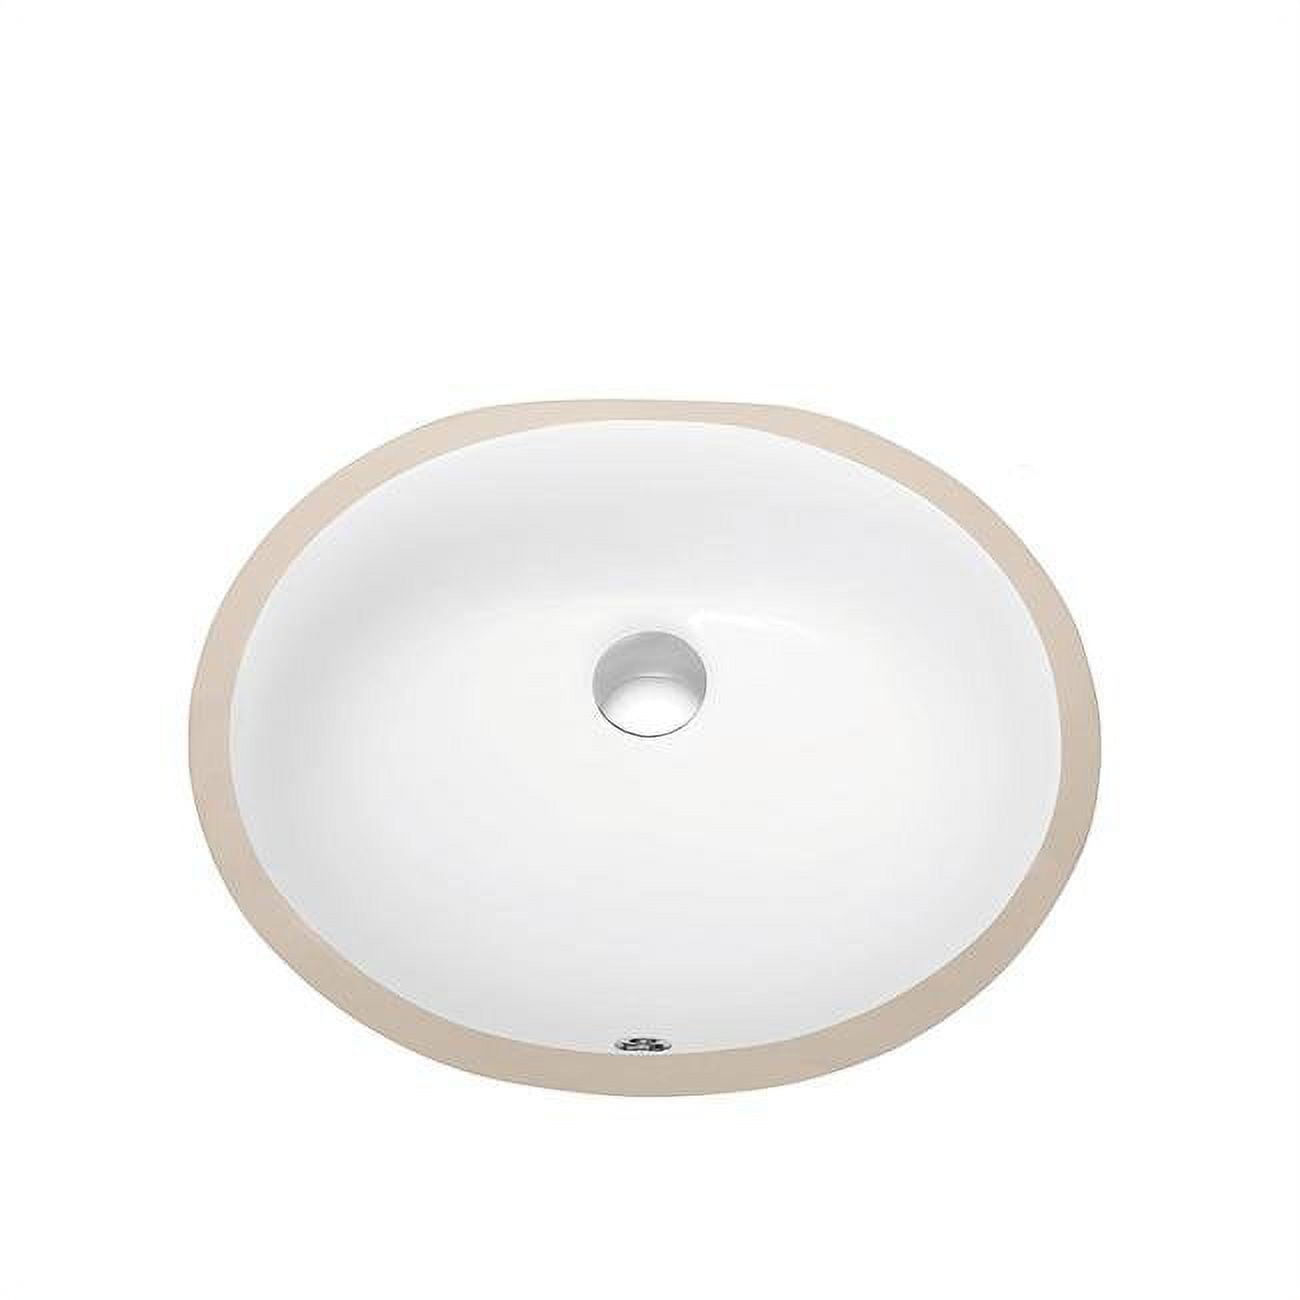 Picture of Dawn CUSN007A00 Under Counter Oval Ceramic Basin with Overflow, White